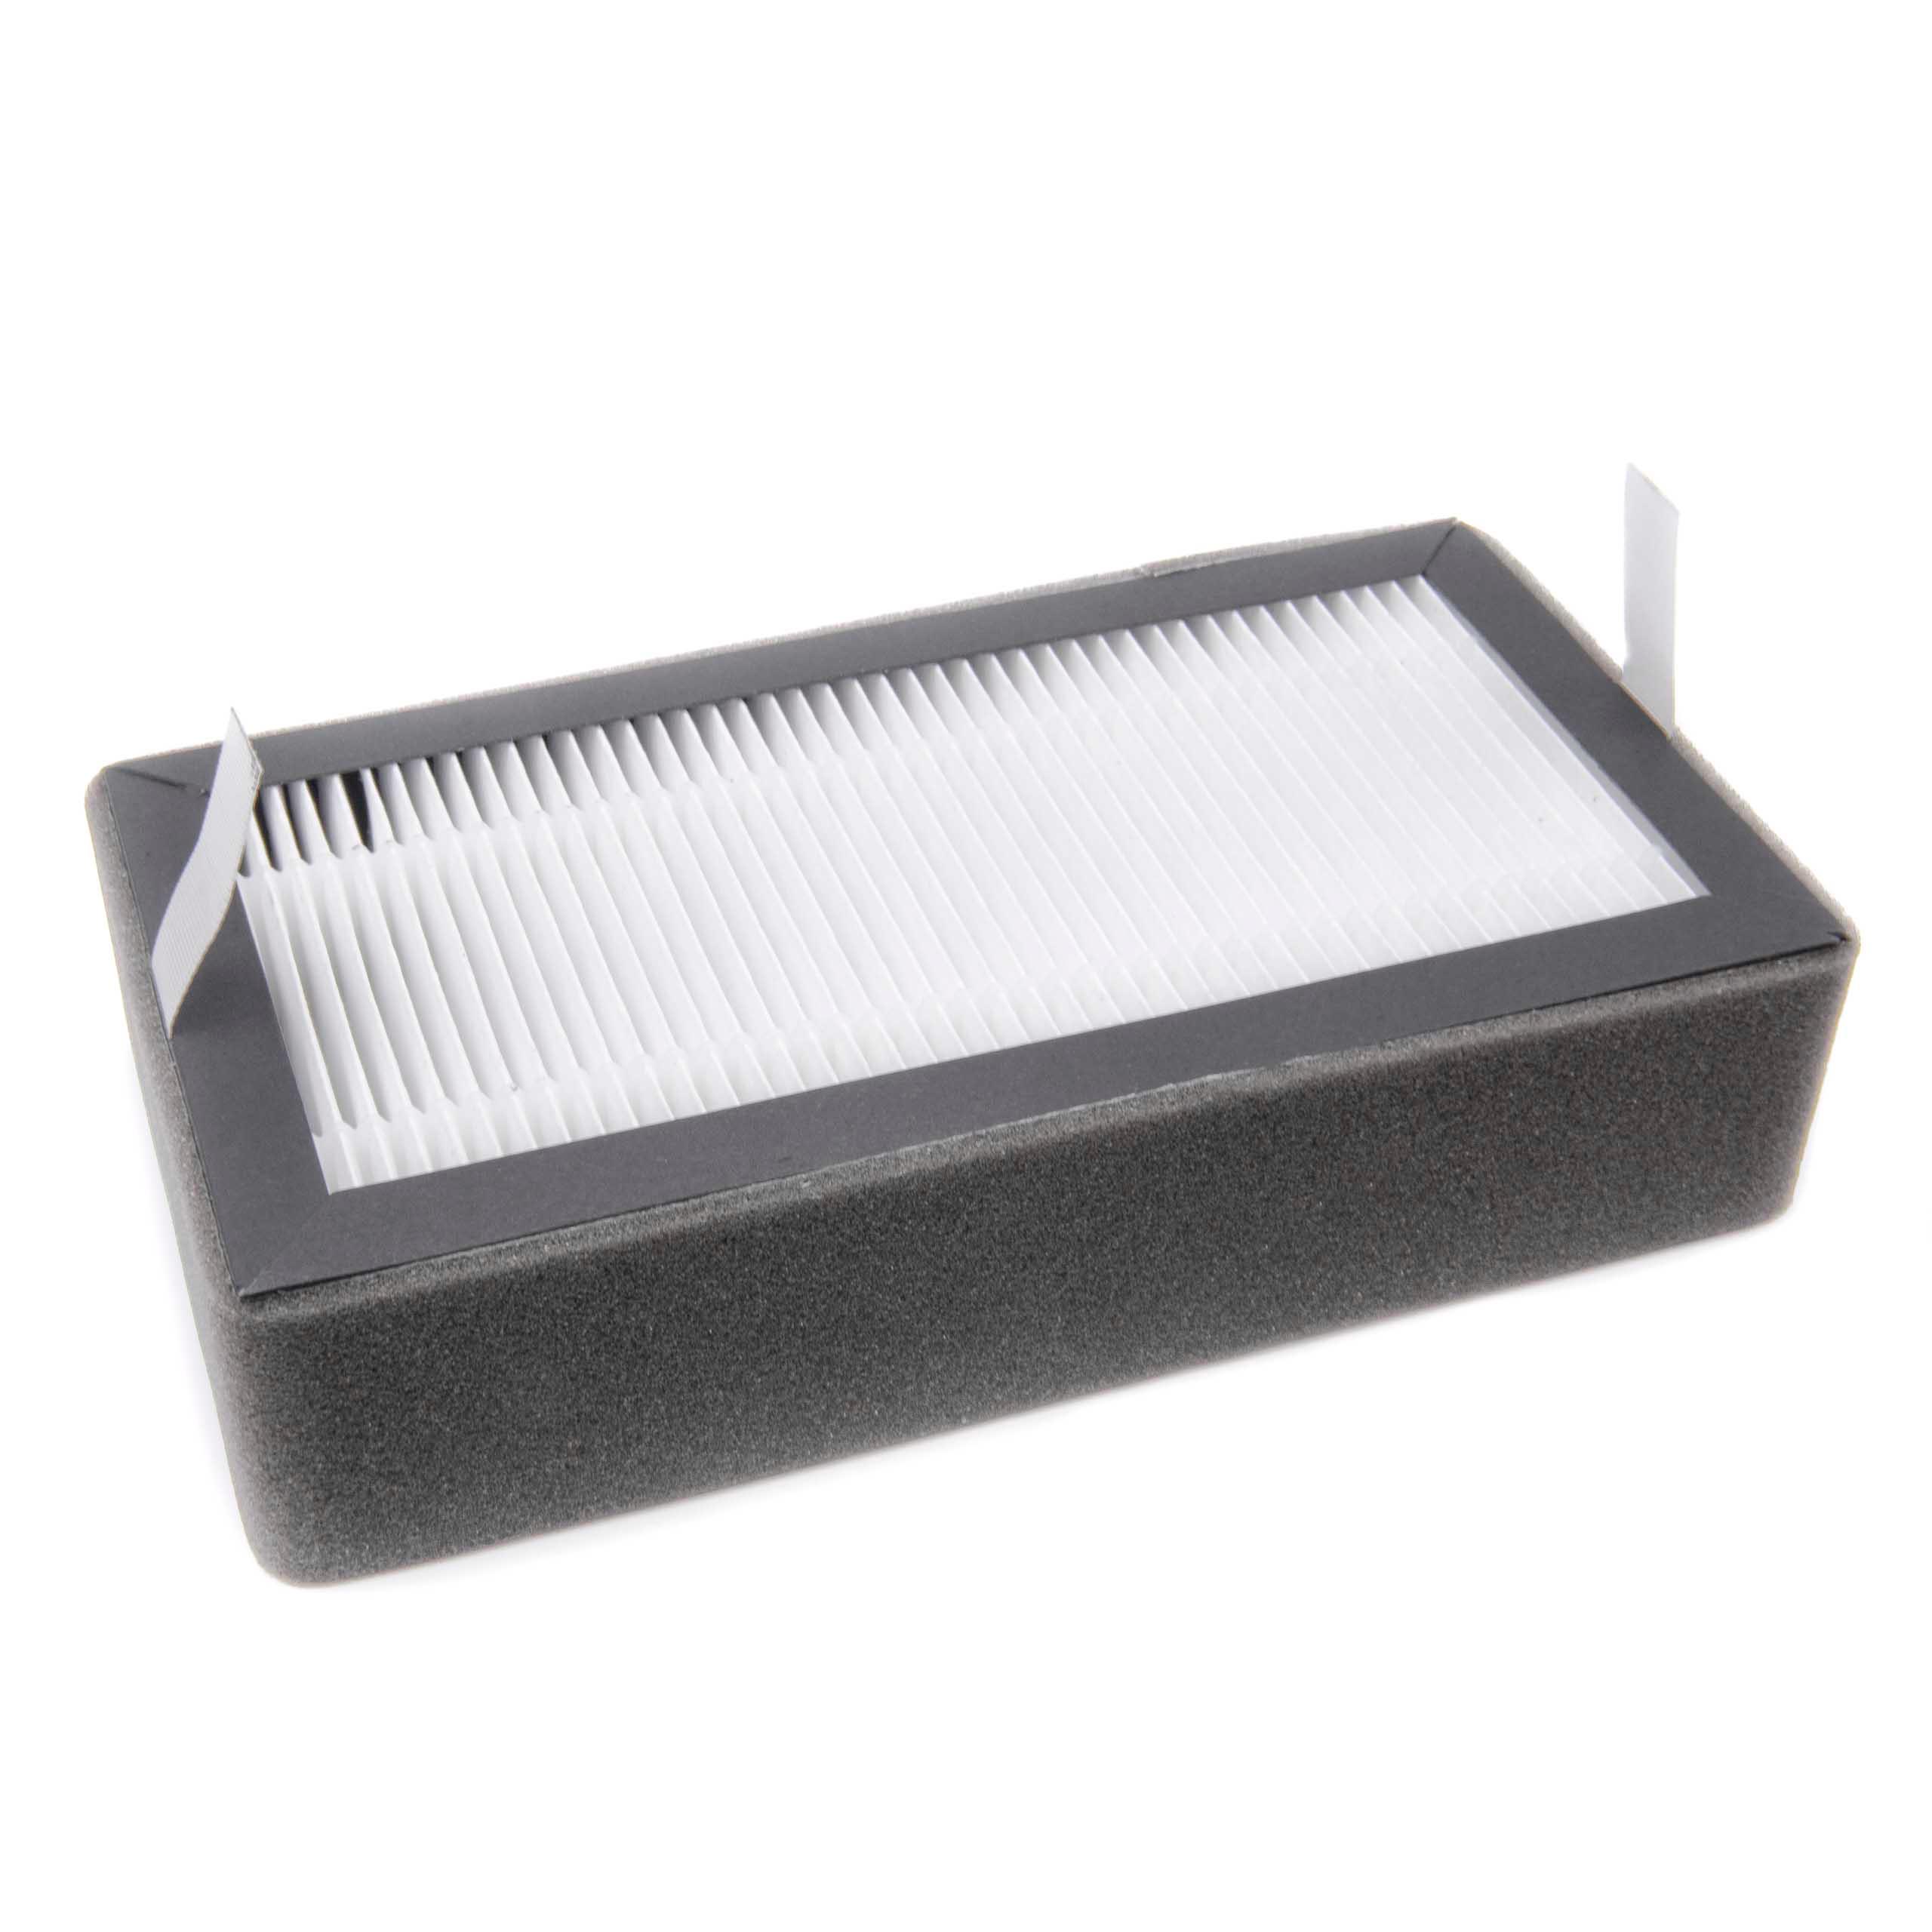 Filter replaces XJ2, PT94049 for Air Purifier etc.